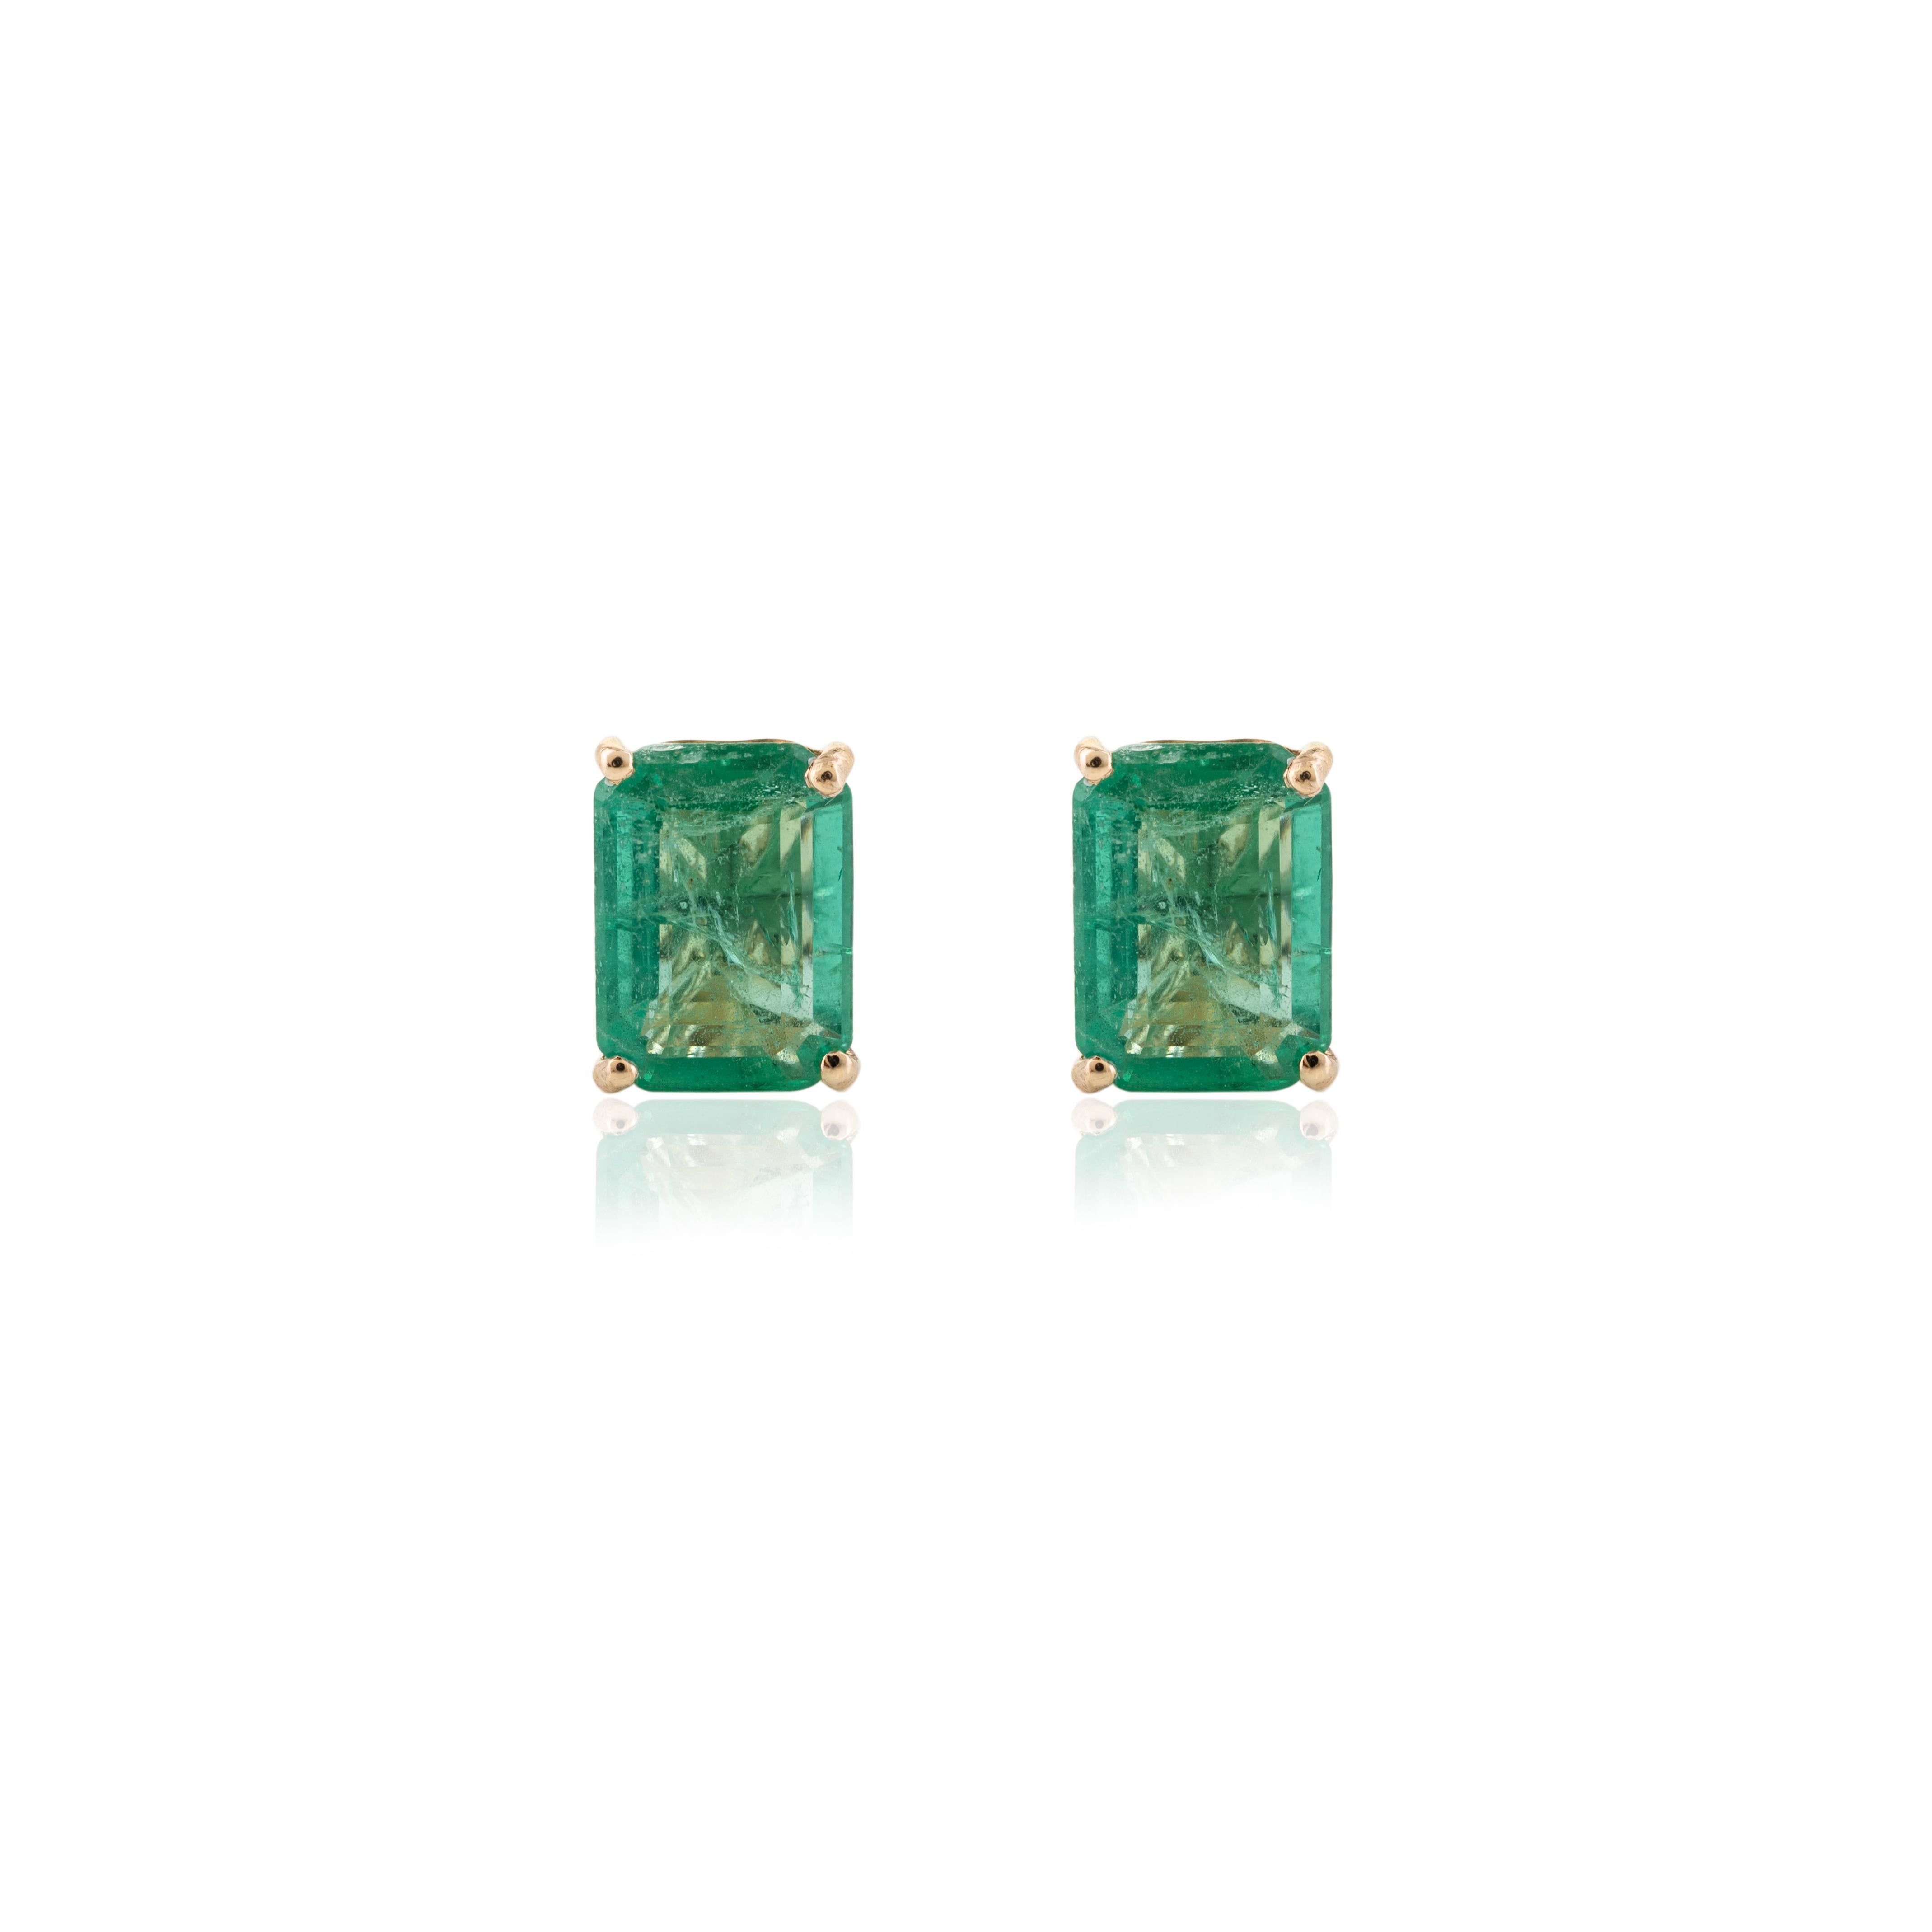 Contemporary Natural Solitaire Emerald 18k Solid Yellow Gold Stud Earrings Gift for Her For Sale